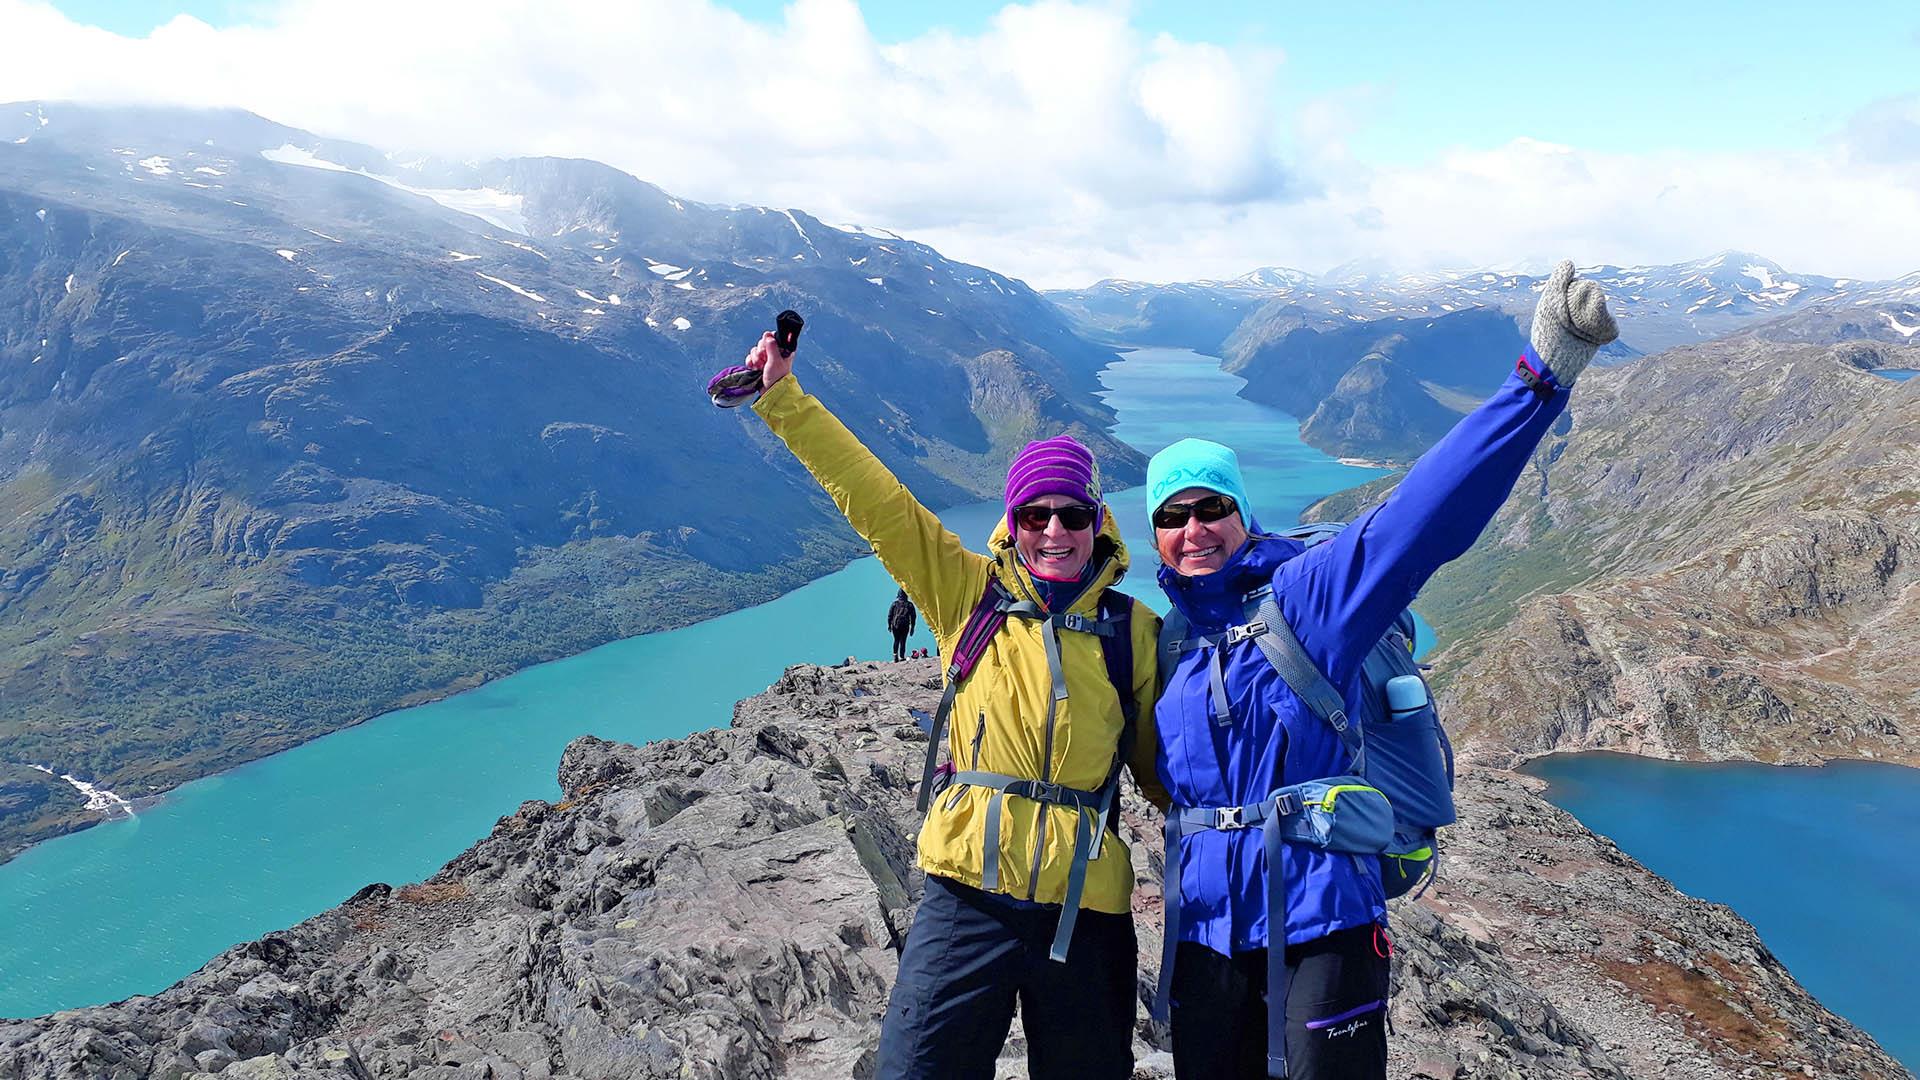 Two hikers in outdoor clothes with their arms in the air are standing on a narrow ridge between two lakes in the high mountains.